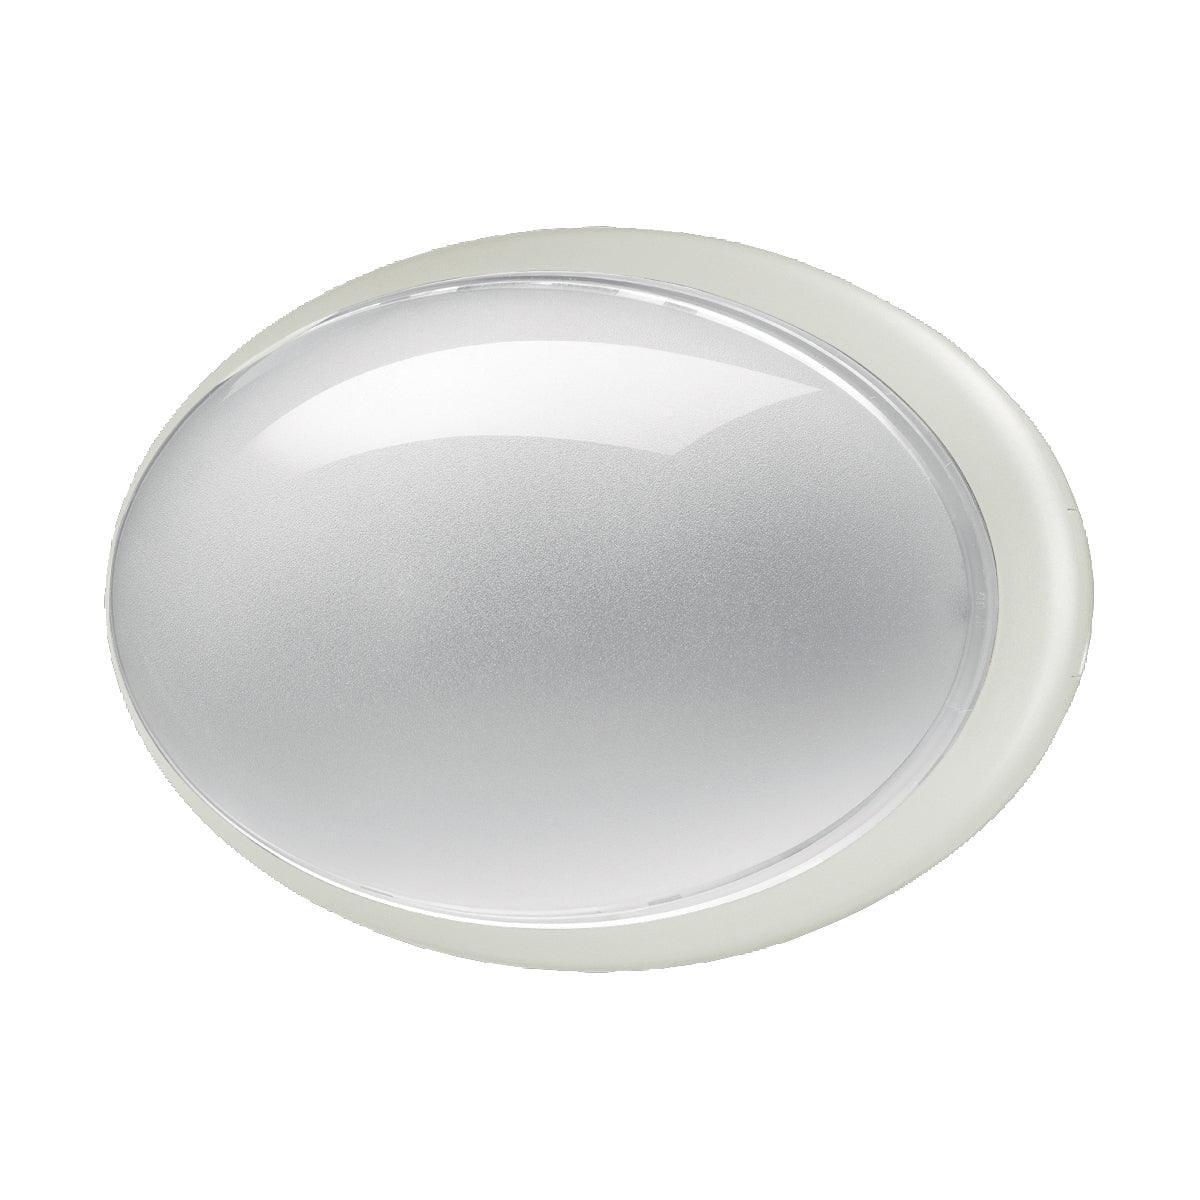 Eurofase - Class Oval Wall Sconce - 23904-019 | Montreal Lighting & Hardware